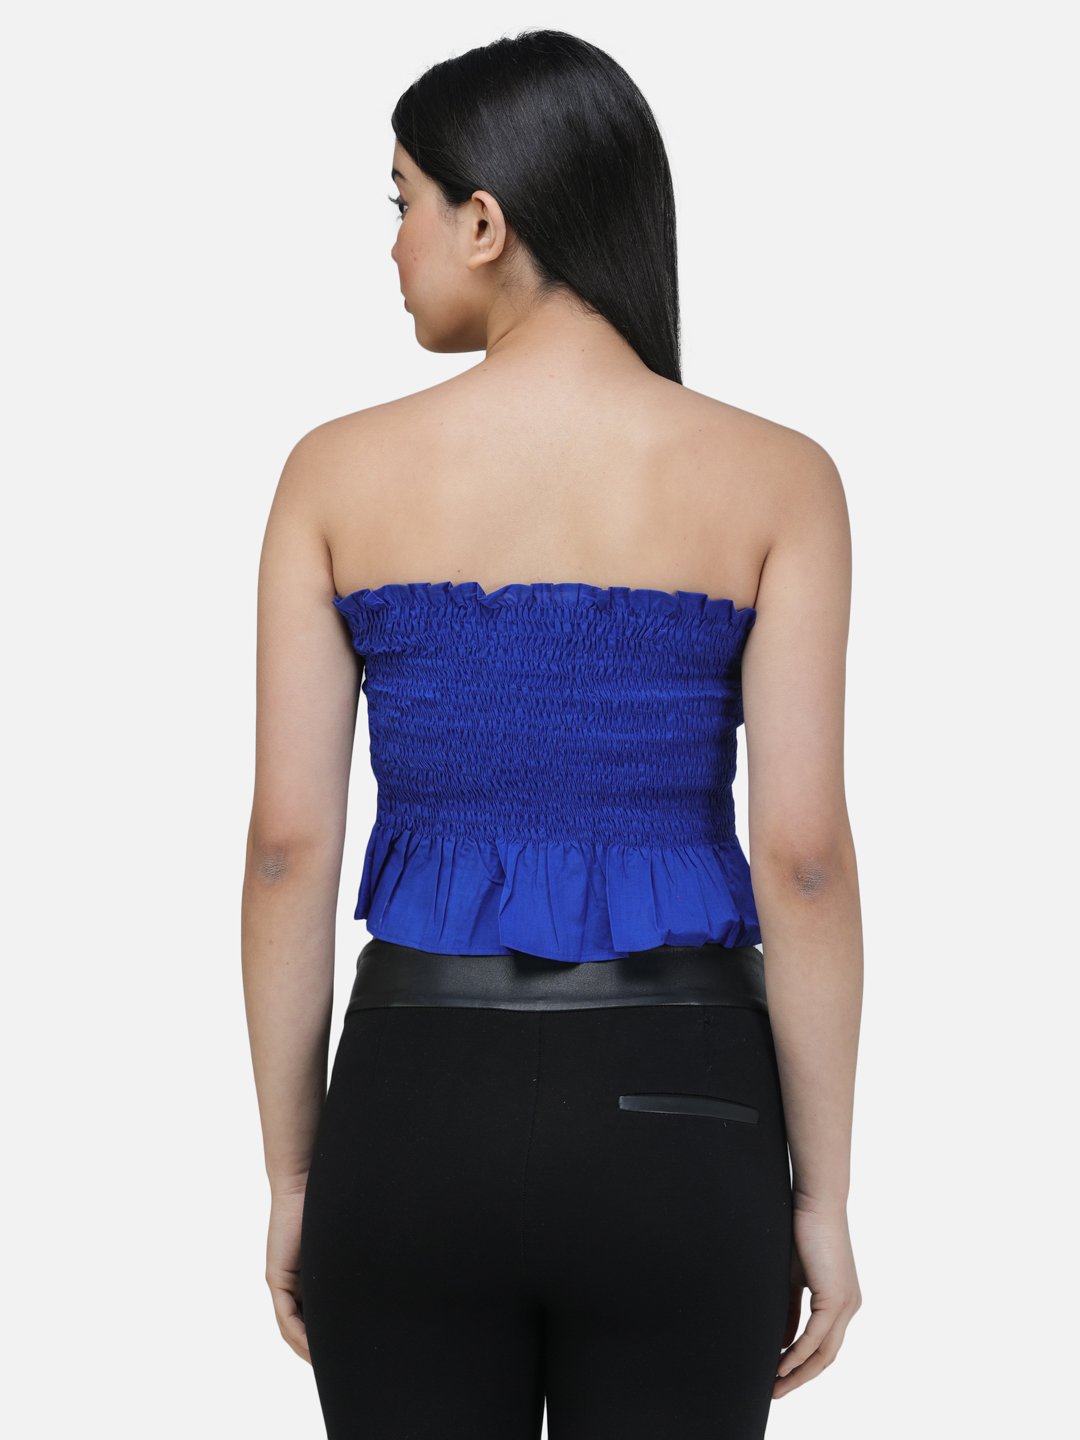 SCORPIUS ROYAL BLUE SOLID OFFSHOULDER TOP WITH SMOKING